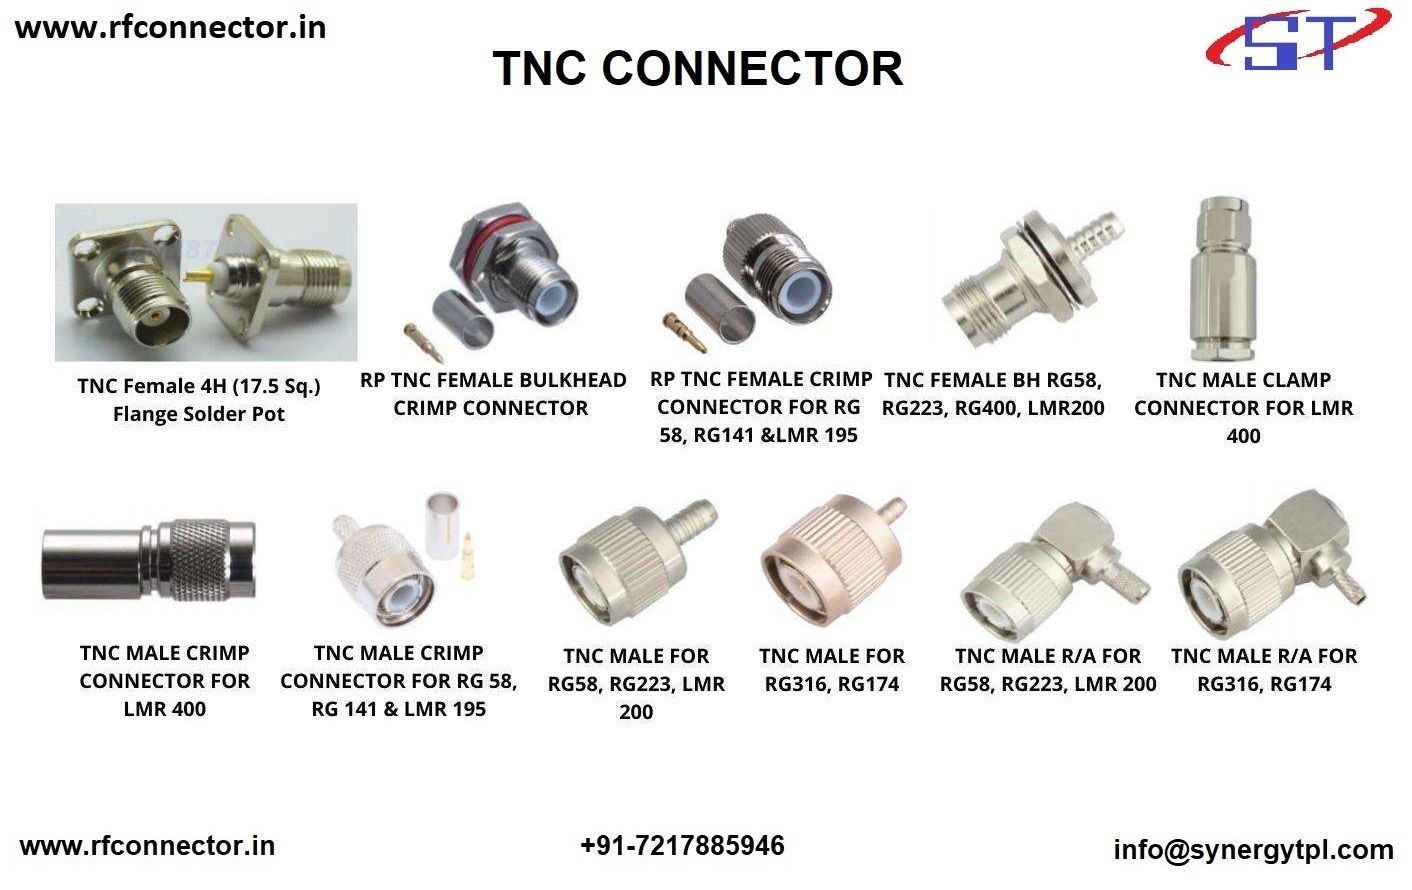 TNC female for LMR 200 cable